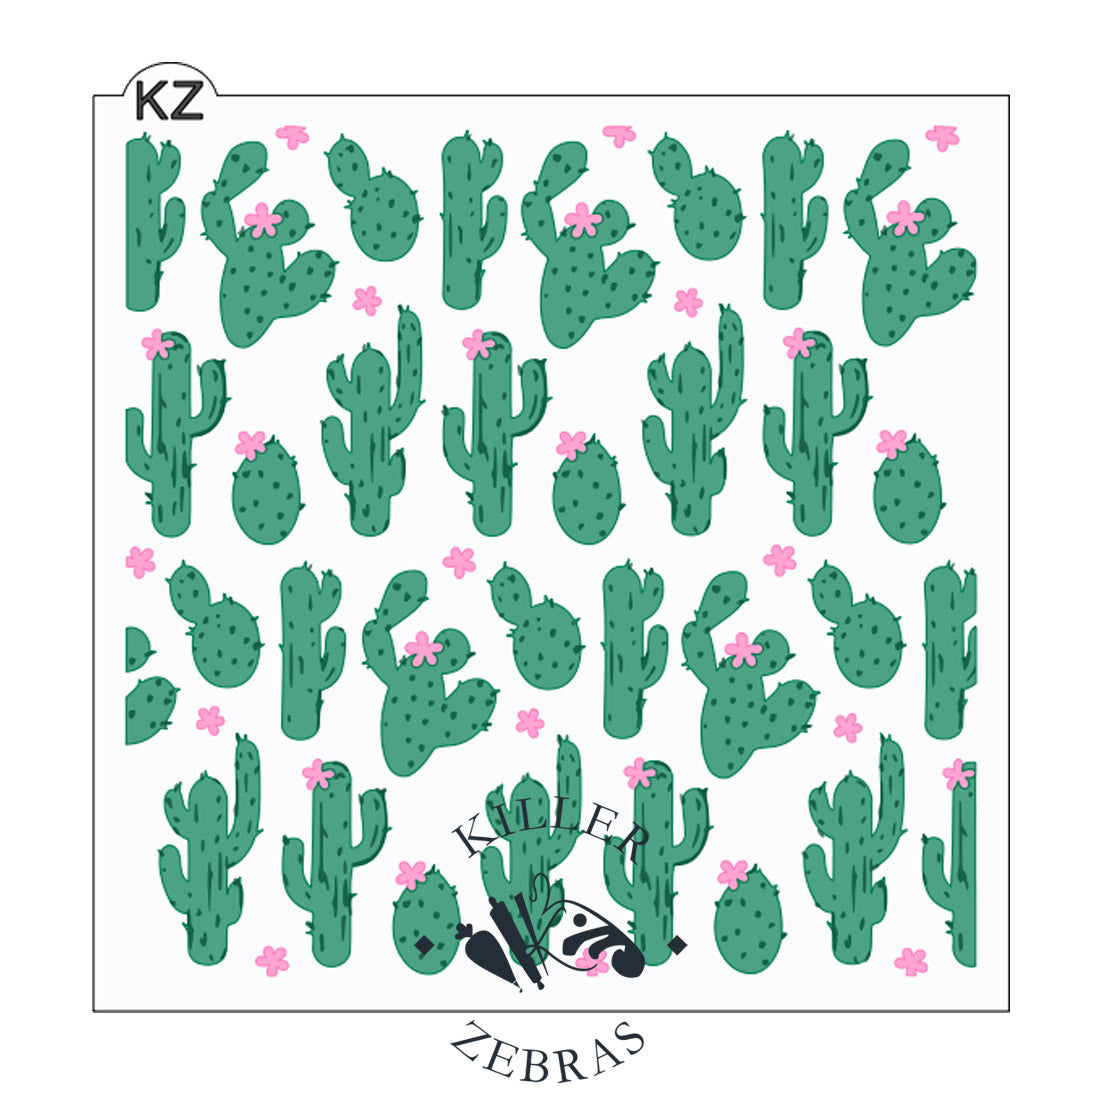 Large, square stencil with different shaped green cacti and light pink flowers on and off the cacti, filling the square.